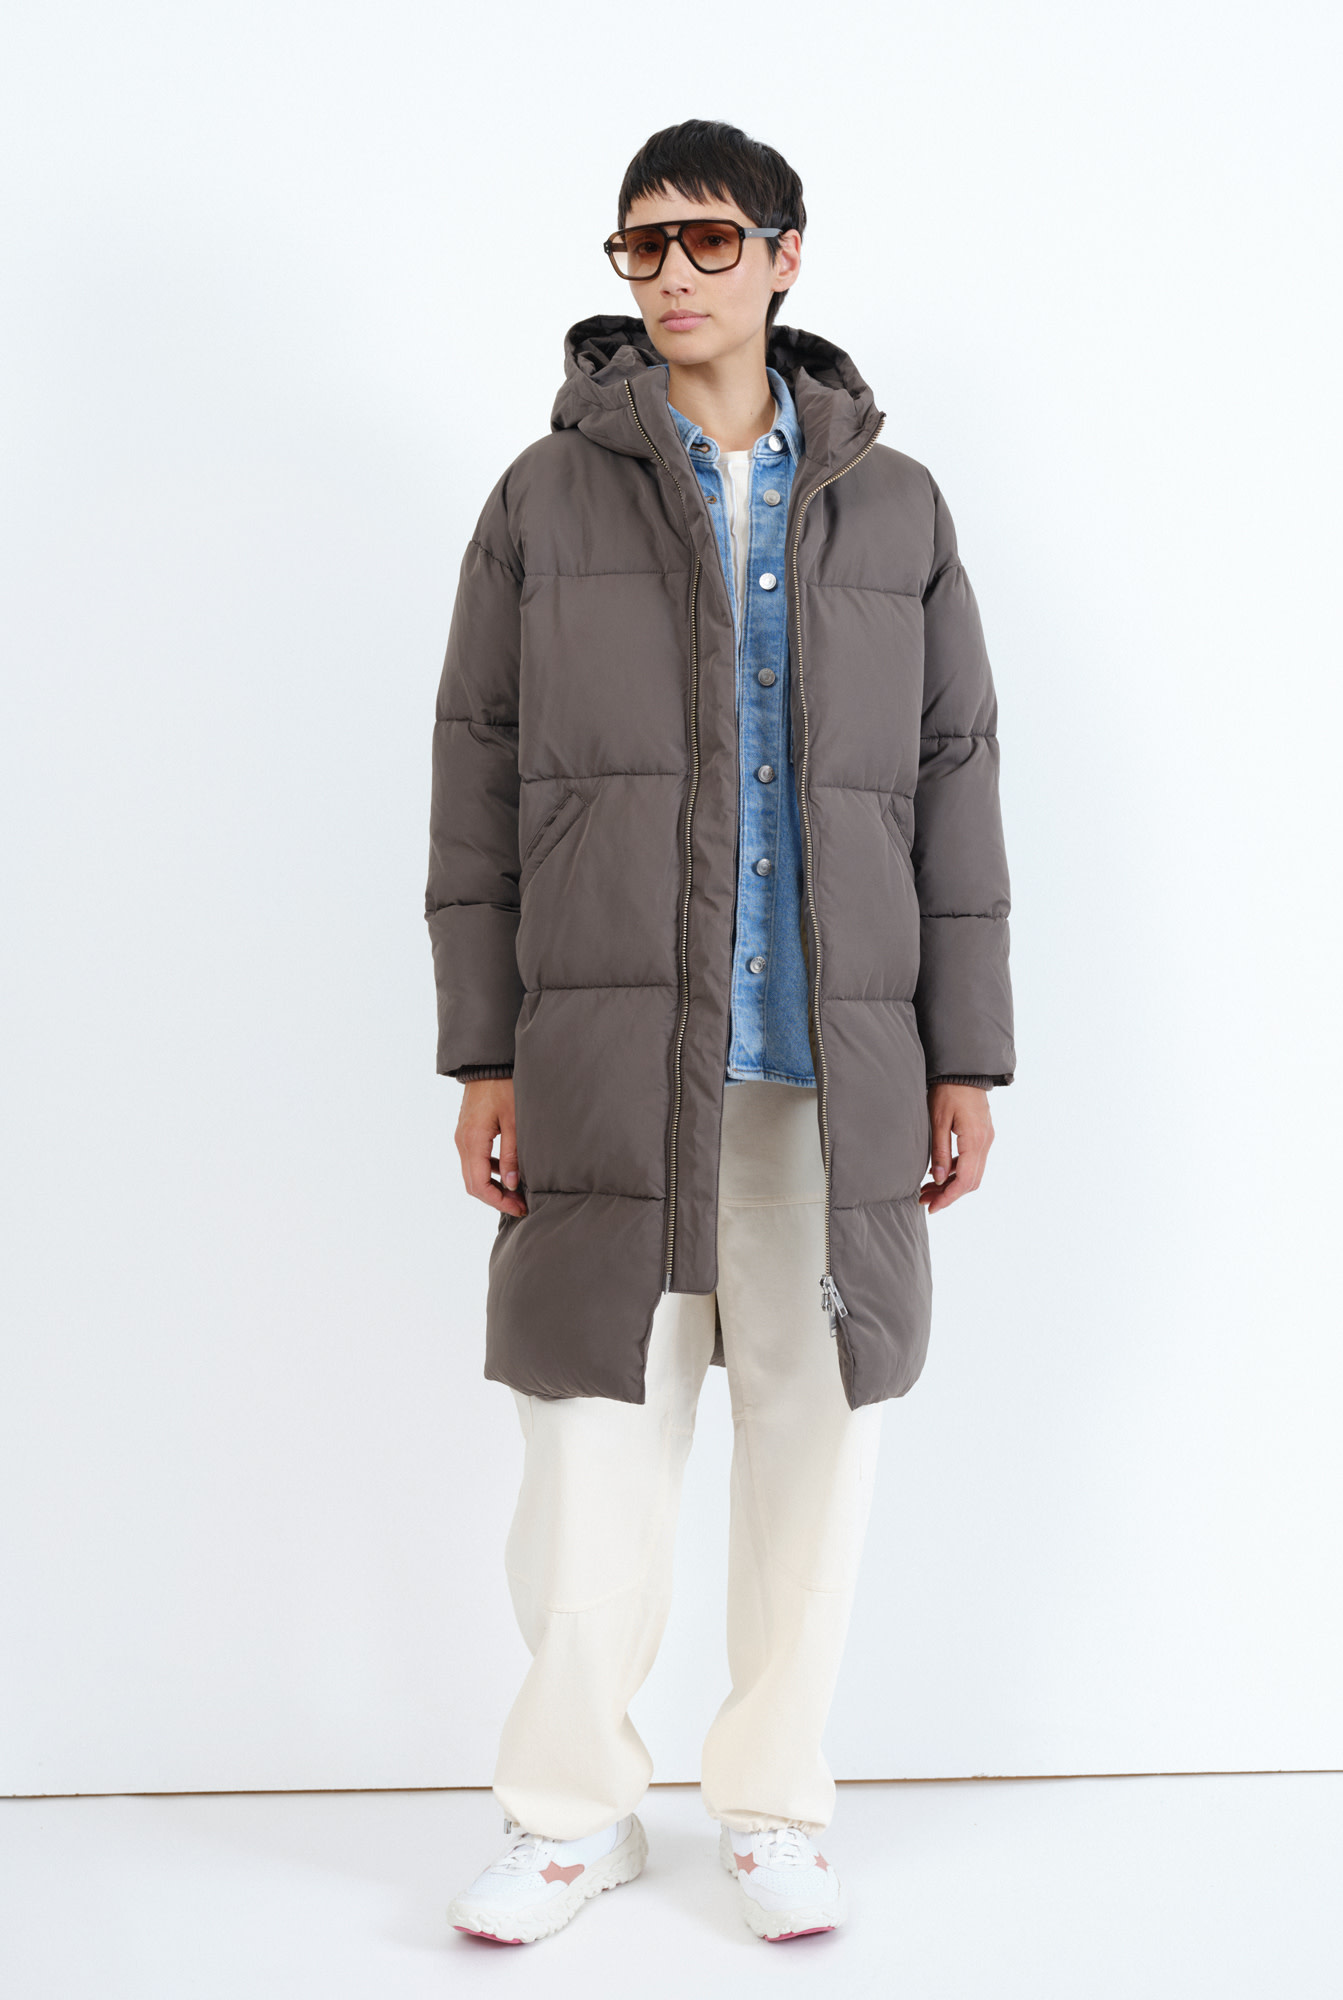 Embassy of Bricks and Logs Embassy of Bricks and Logs, Elphin Puffer Coat, black olive, XS